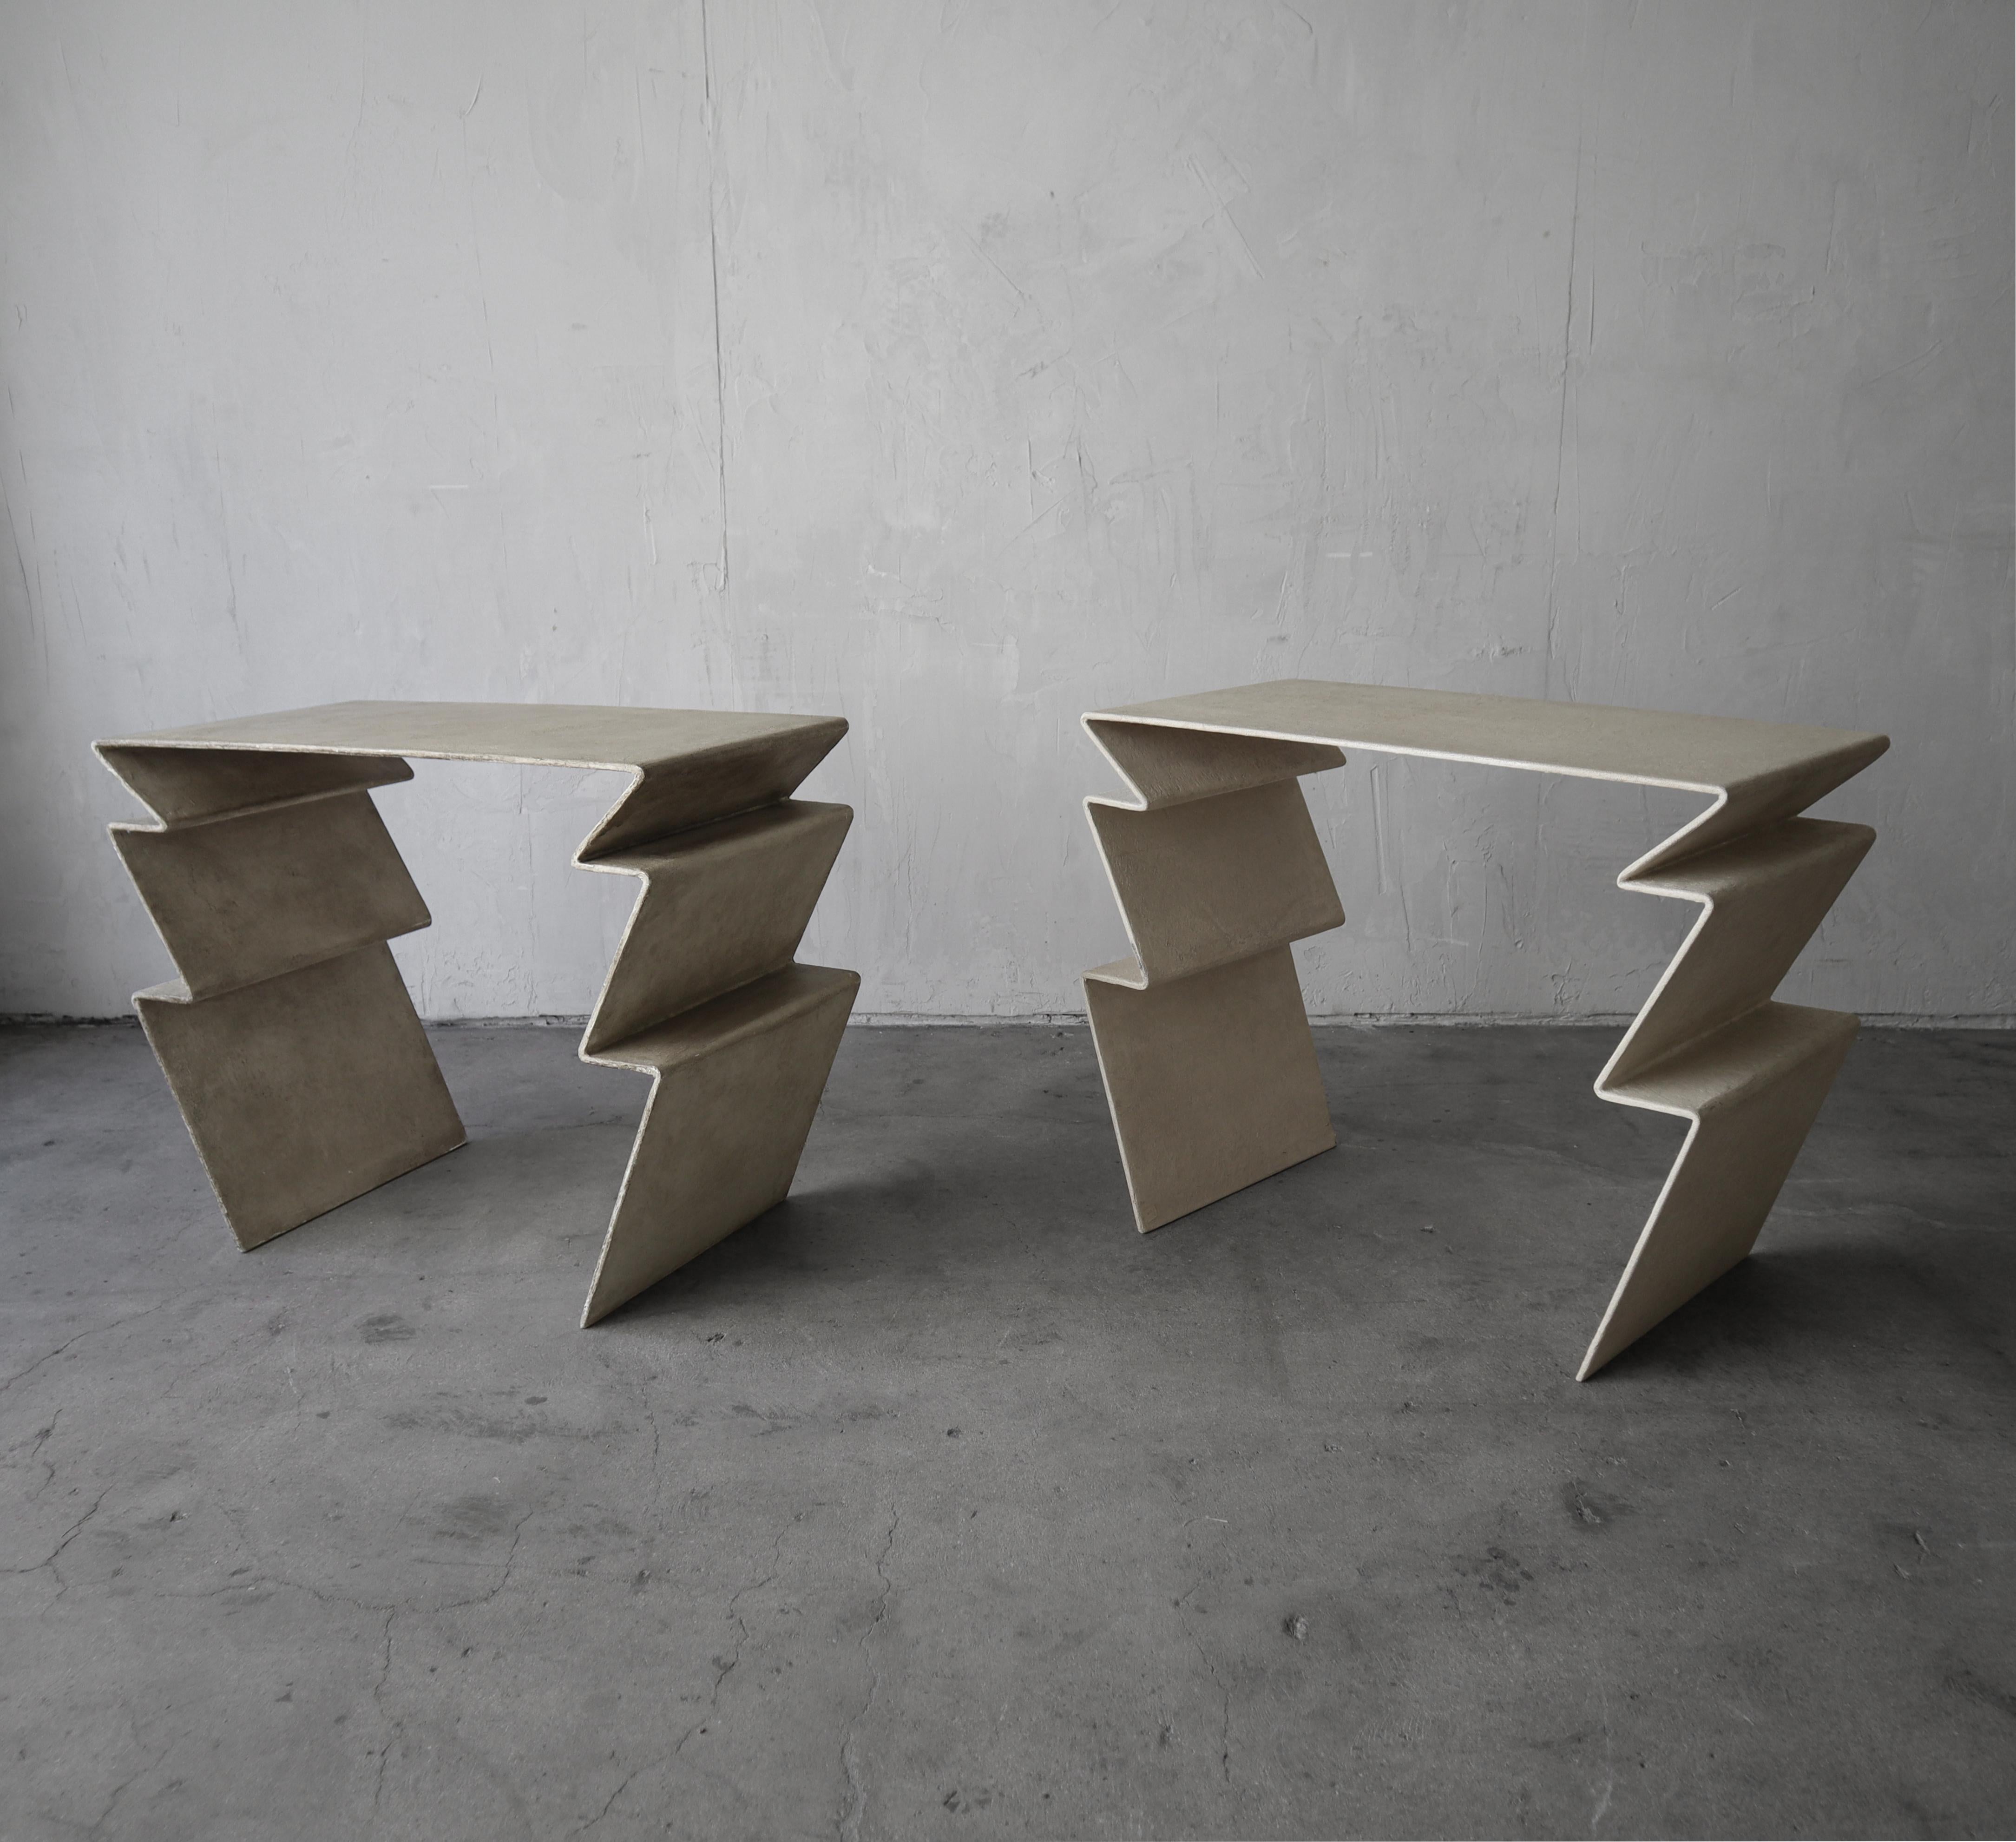 This is a super unique pair of large Post Modern side tables.  They are constructed out of bent metal and covered in grass cloth and plaster.  They are real pieces of art.  They came from a multimillion dollar estate of a famous artist and art